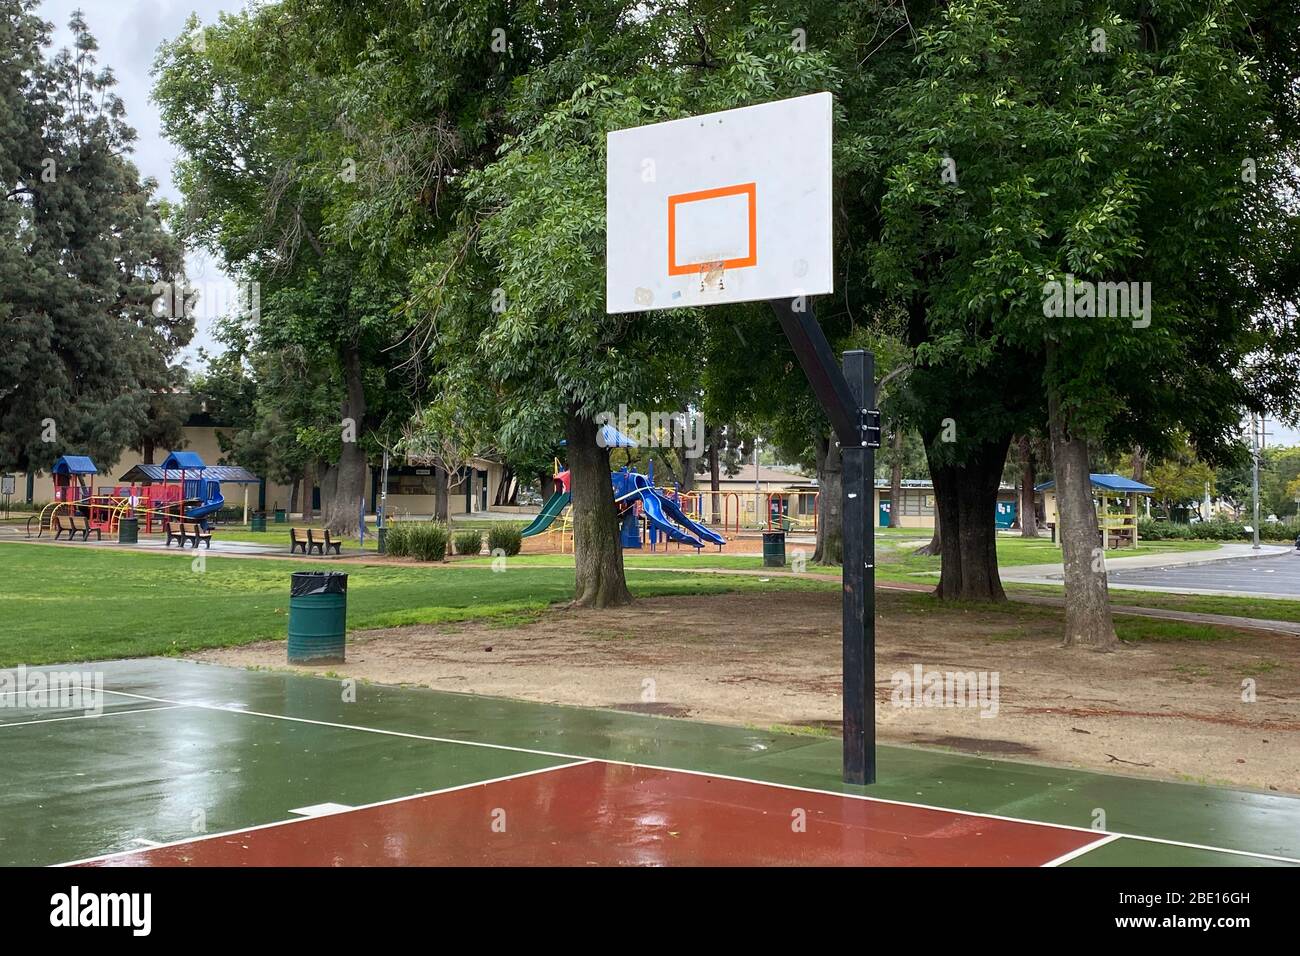 Los Angeles, United States. 09th Apr, 2020. Los Angeles, USA. April 09  2020: General overall view of closed basketball court with the rim and net  removed at Obregon Park amid the global